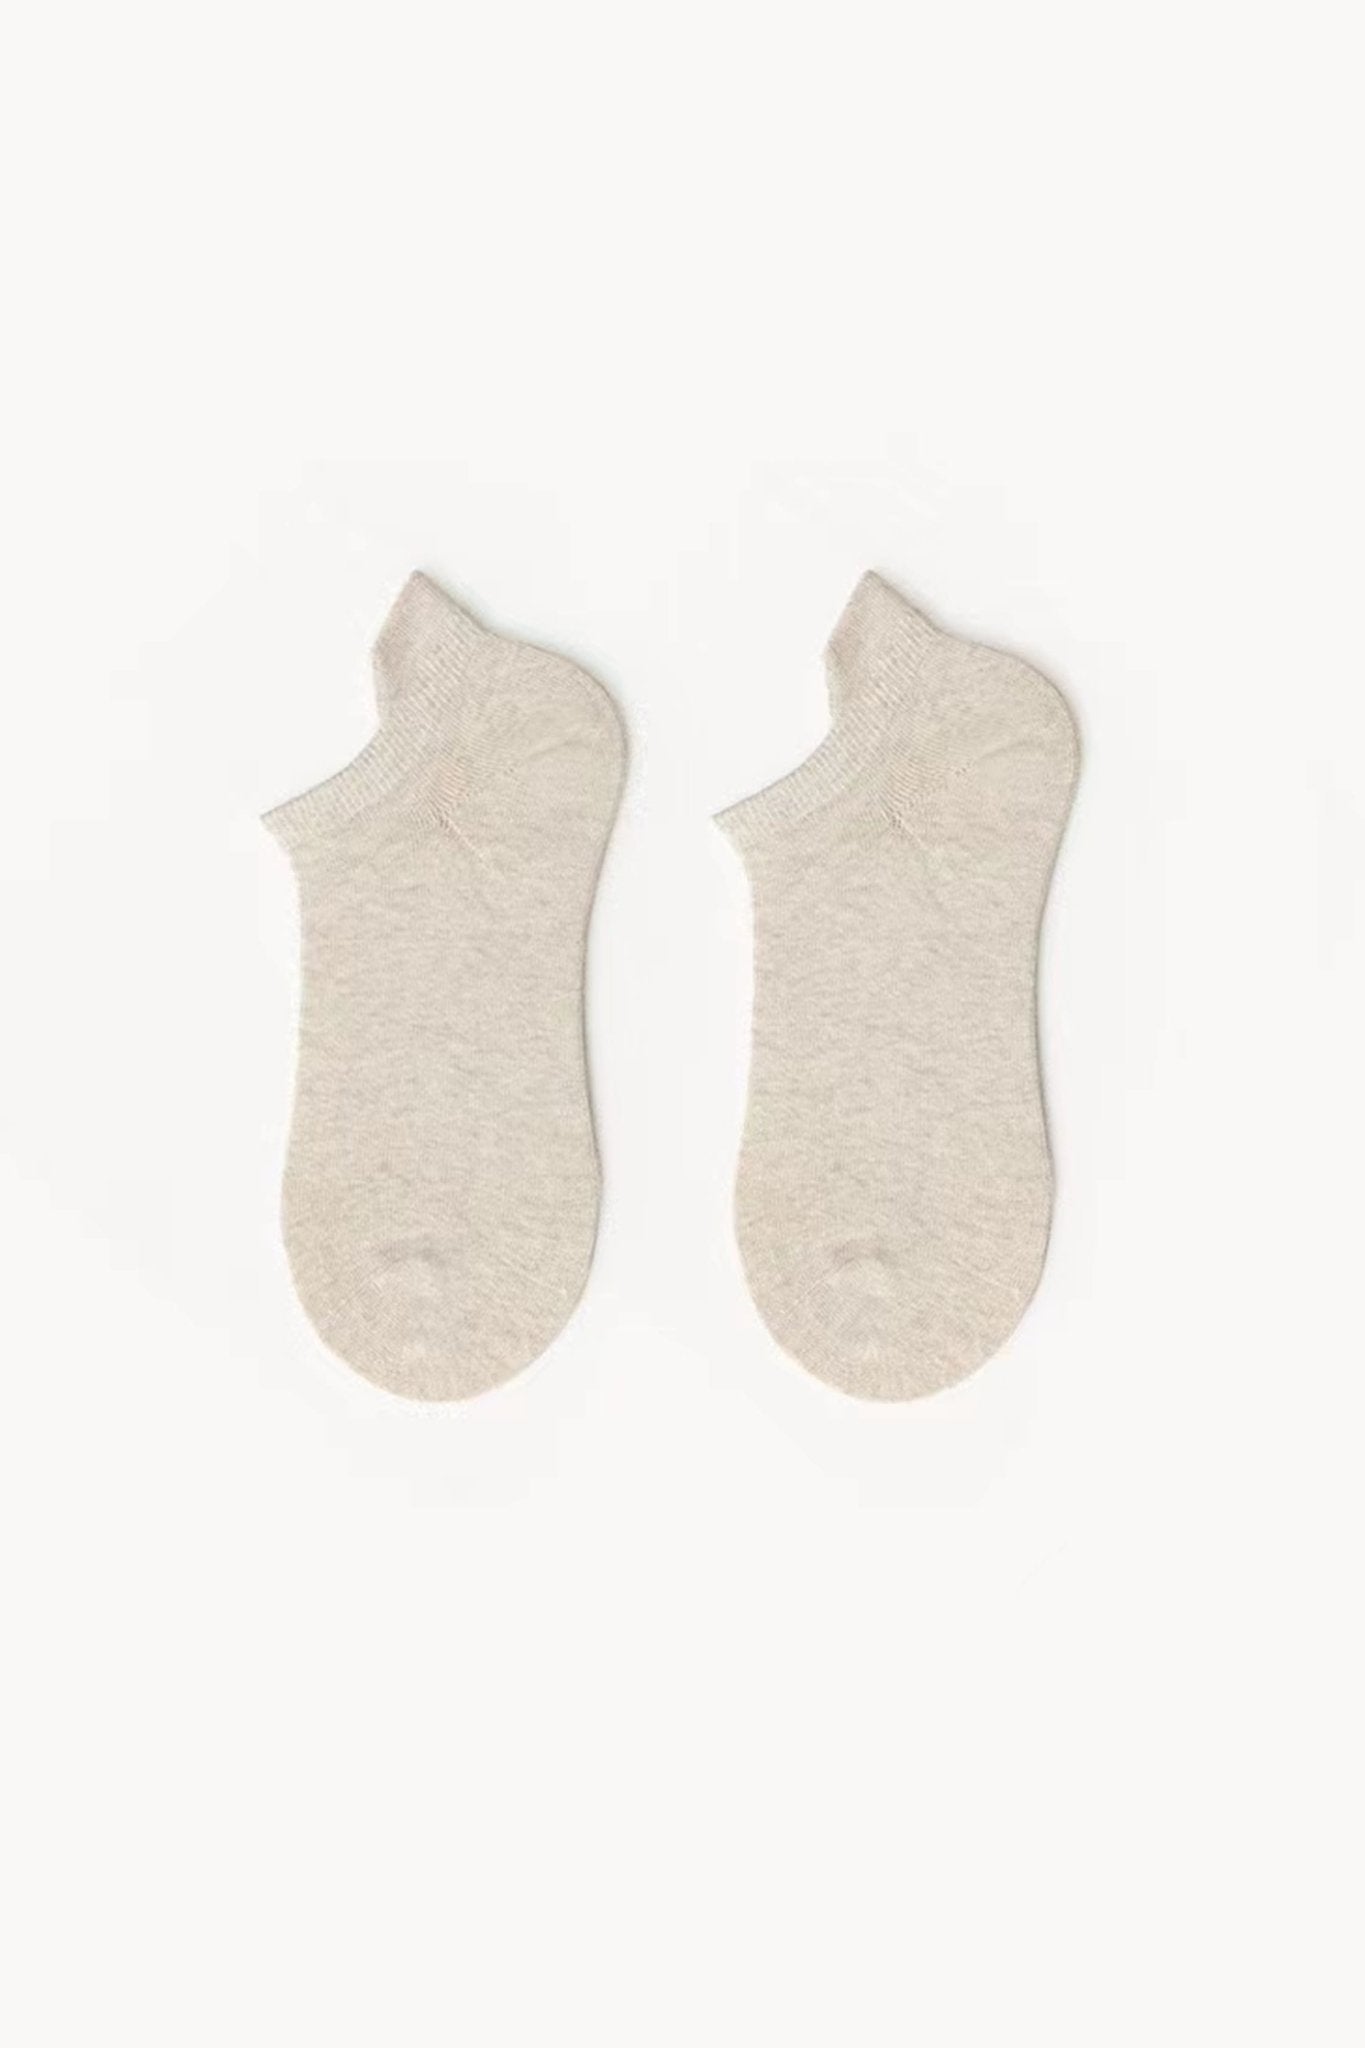 The Four Seasons Socks | Breathe Freely And Absorb Sweat - POSESHE